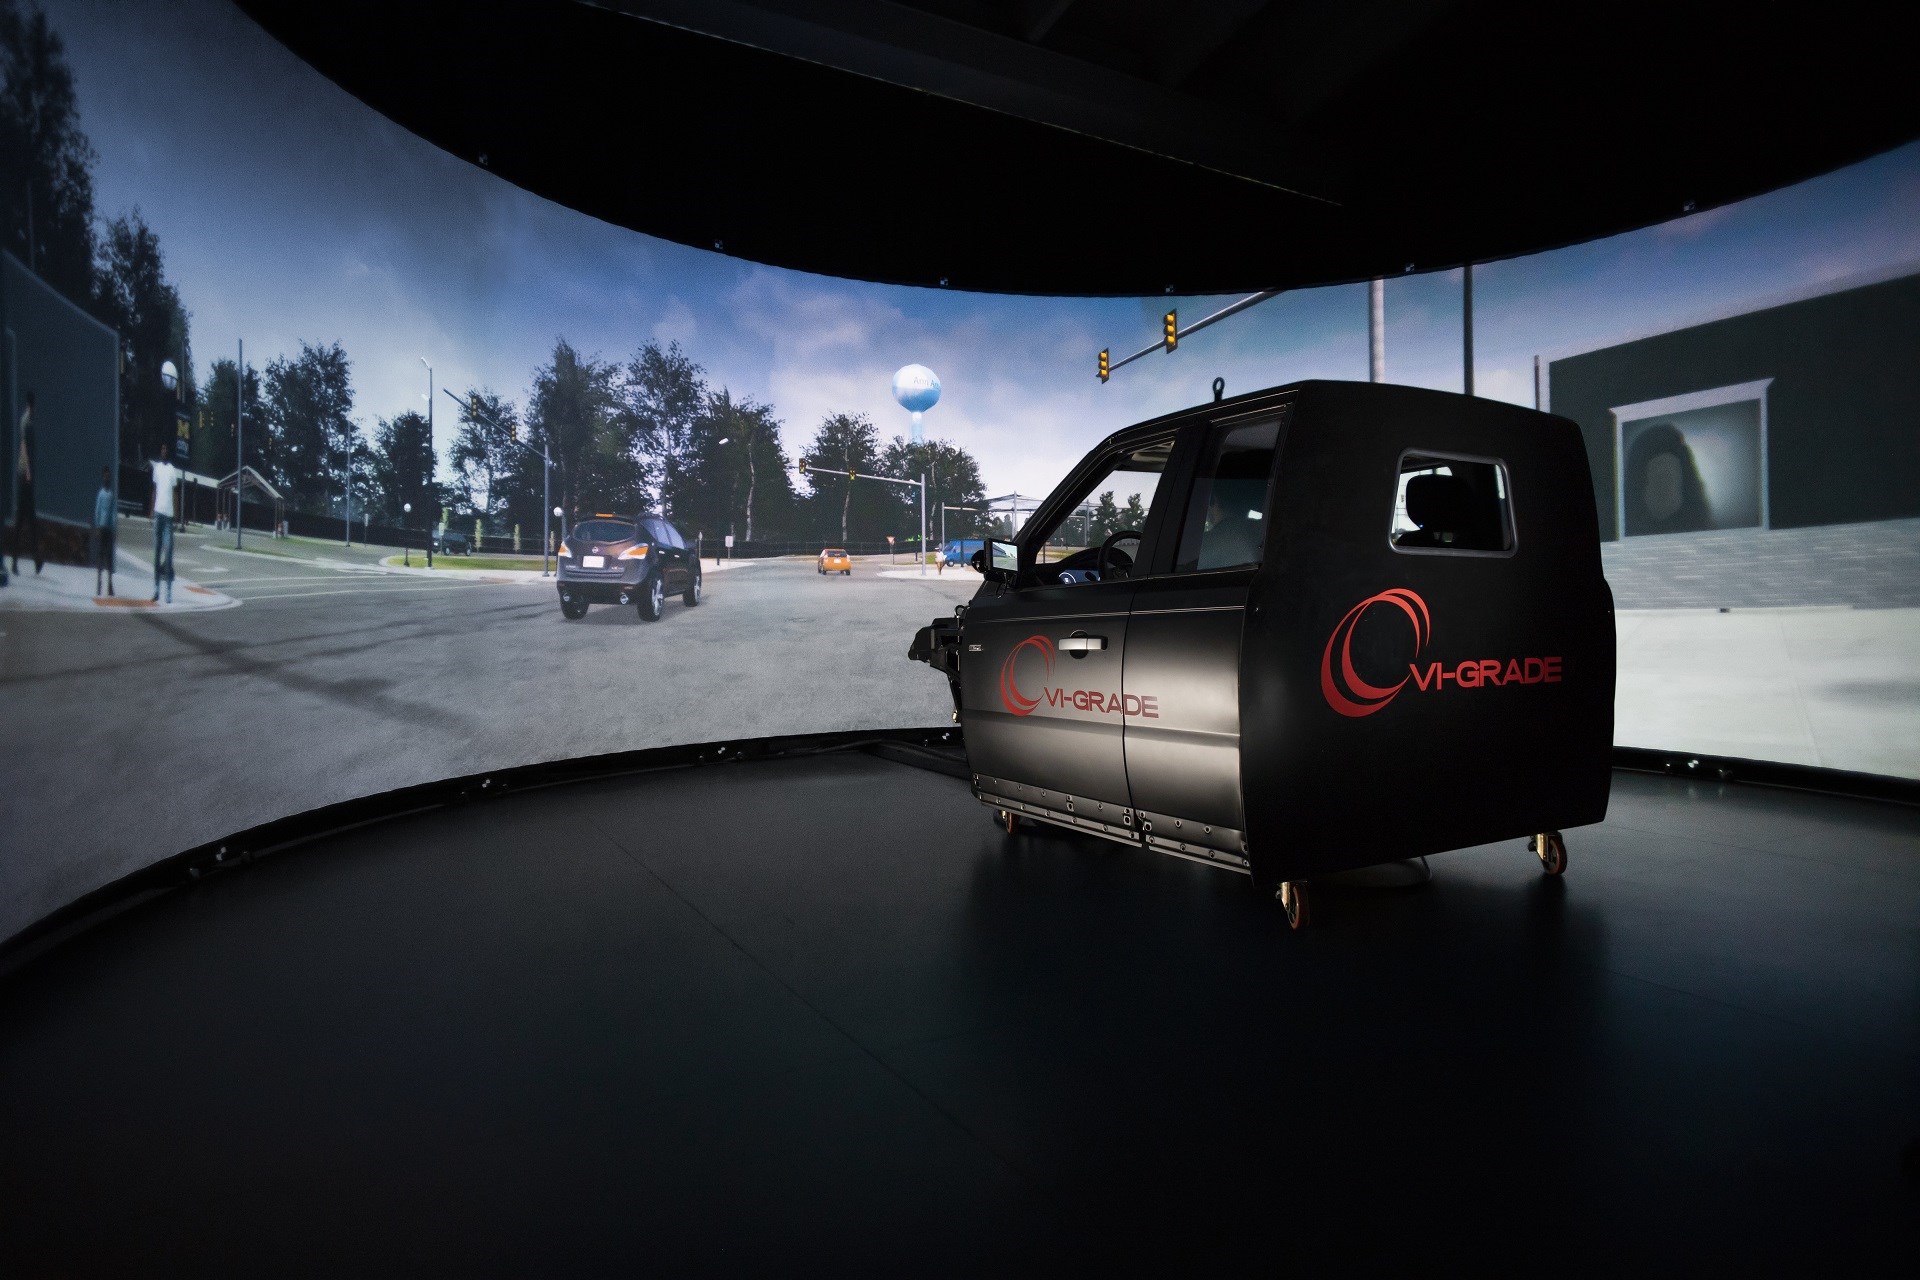 Newest Technology Driving Car Simulator From China - China Car Driving  Simulator, Simulator